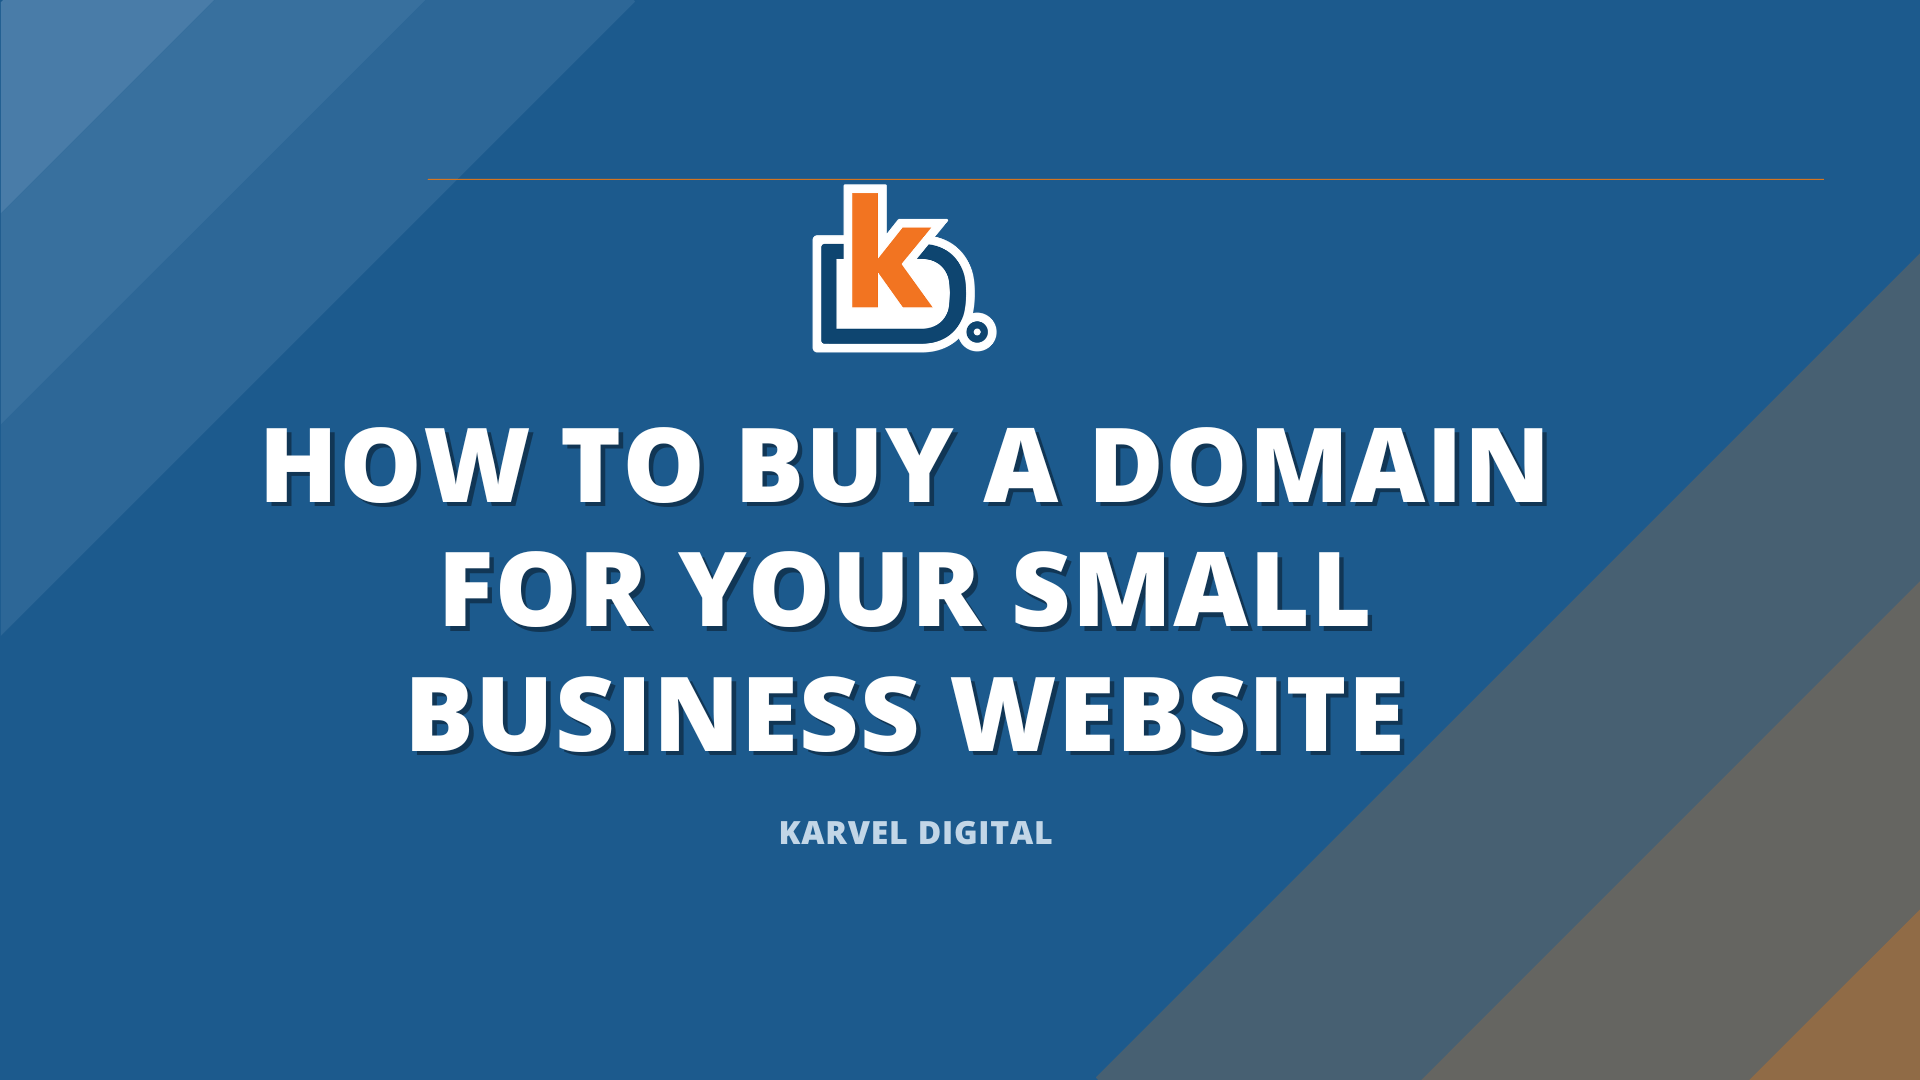 How to Buy a Domain for Your Small Business Website